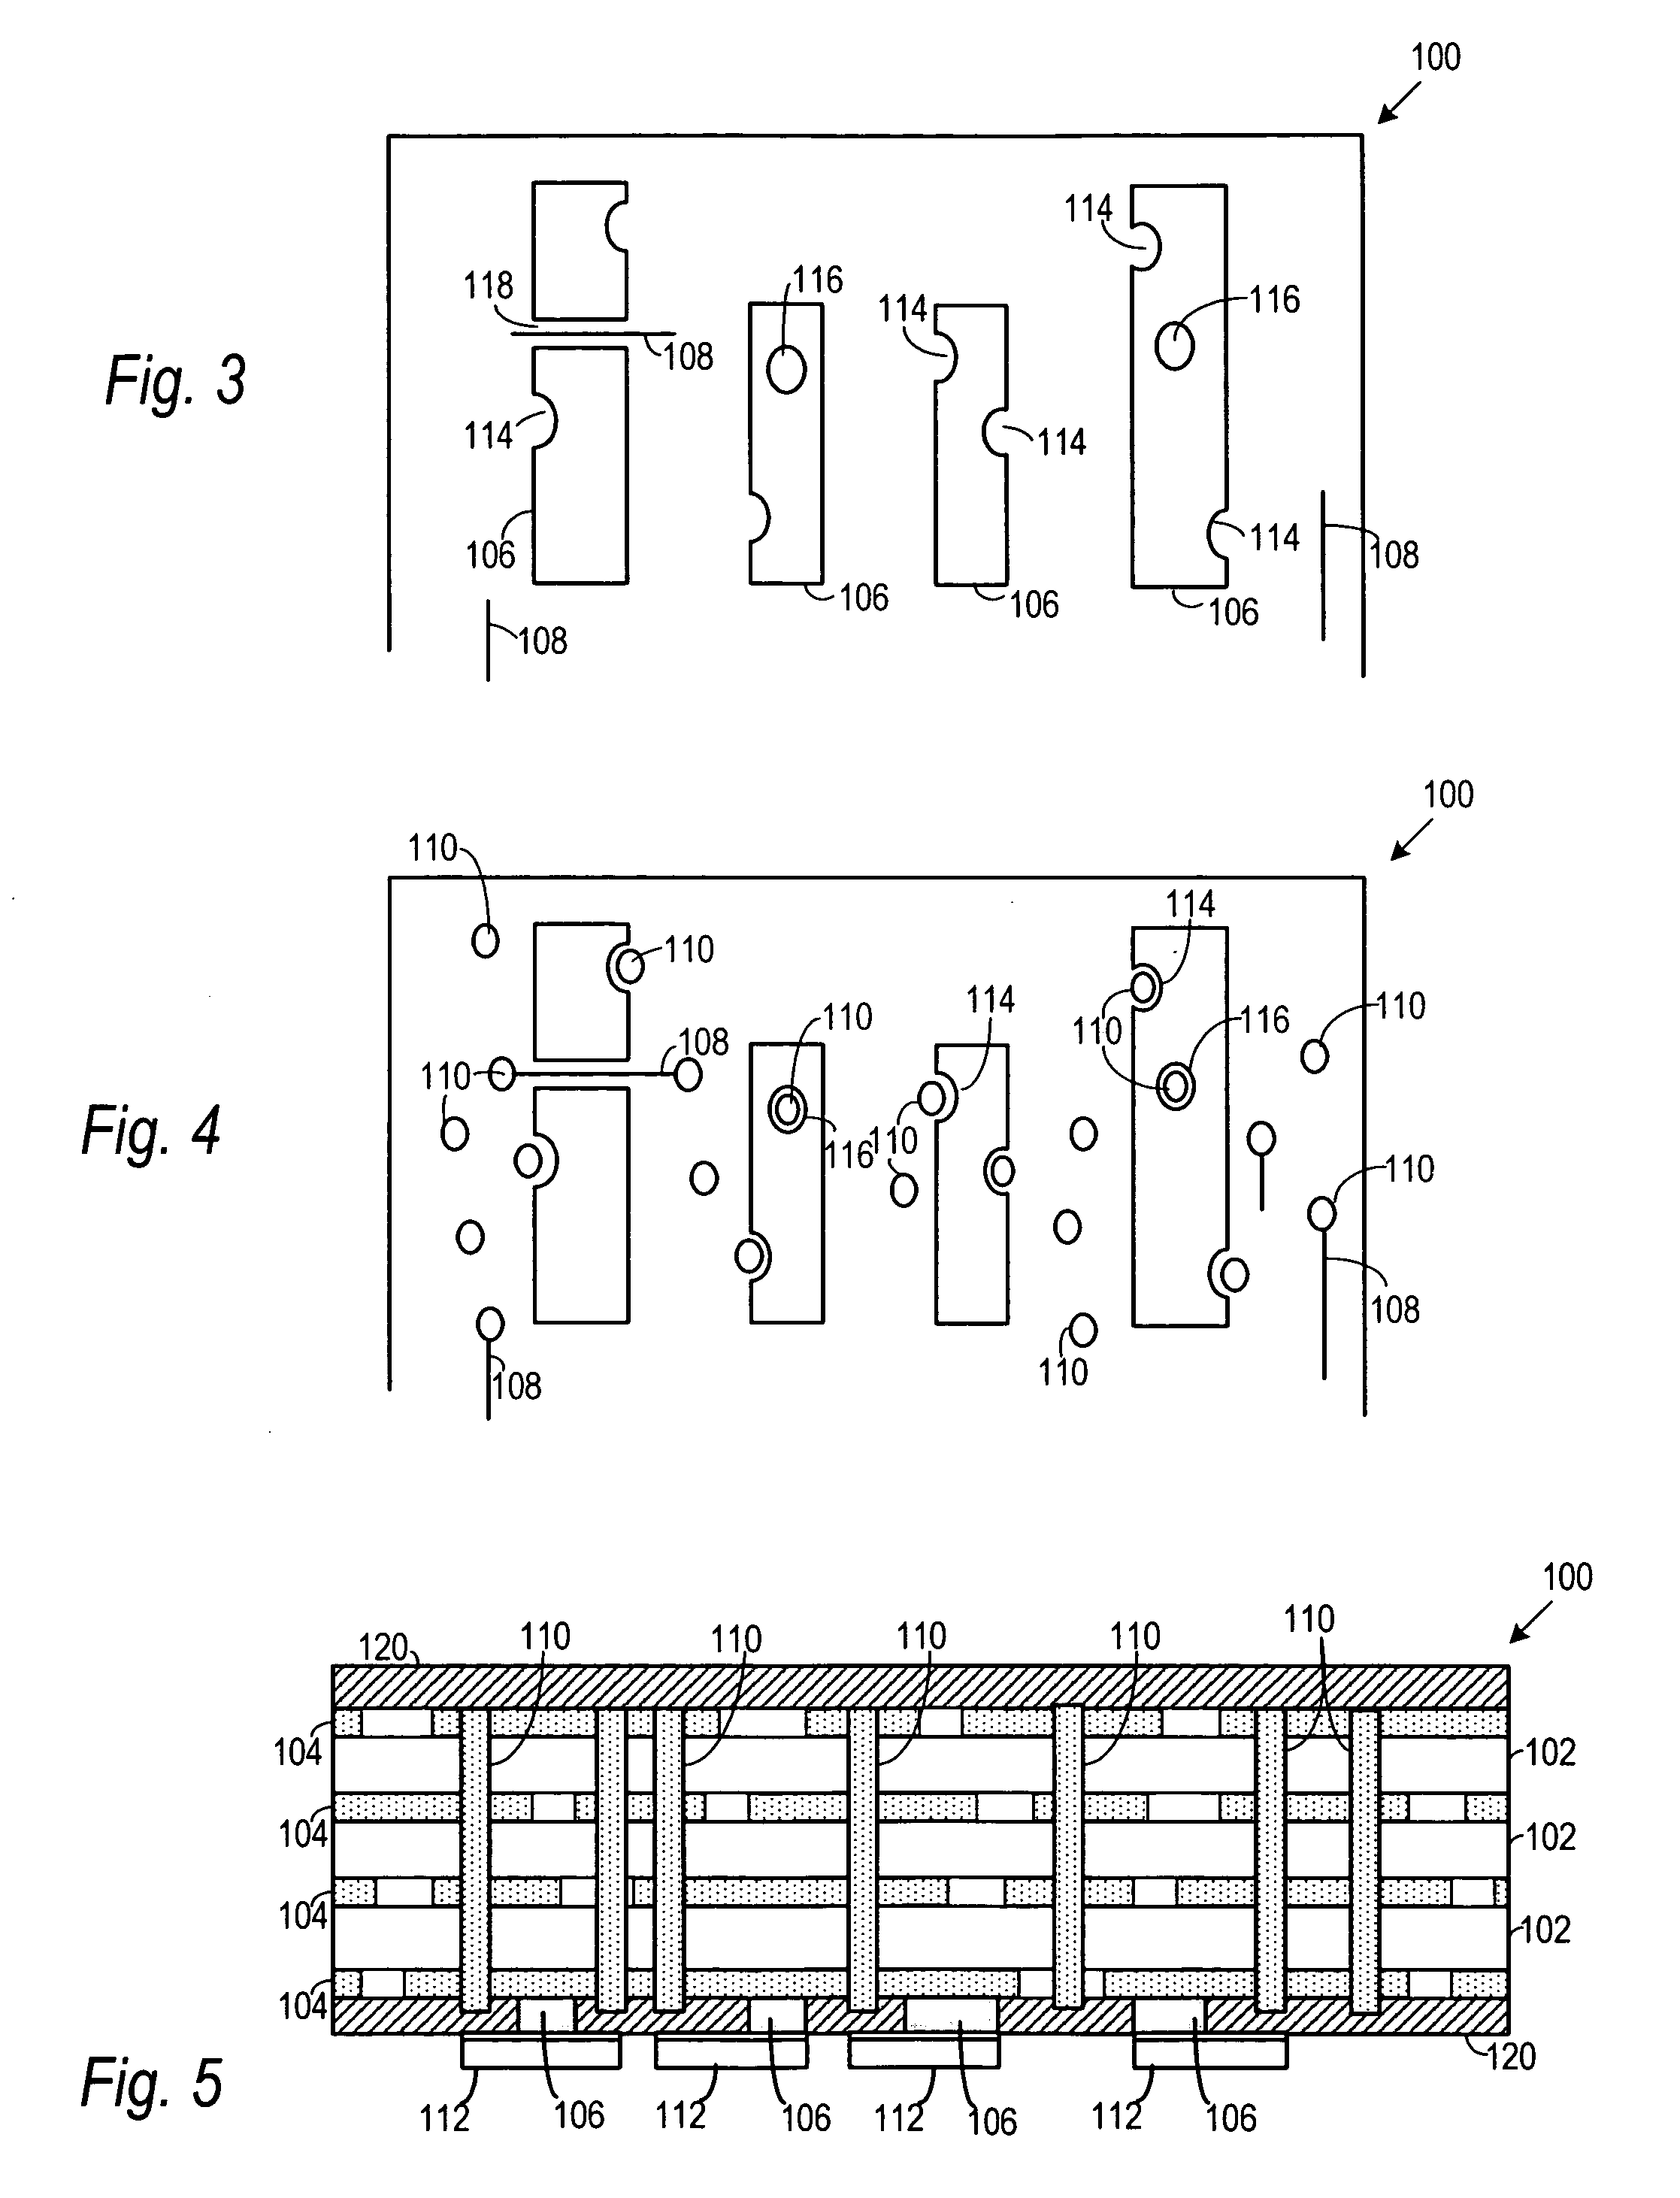 Printed circuit board with coextensive electrical connectors and contact pad areas